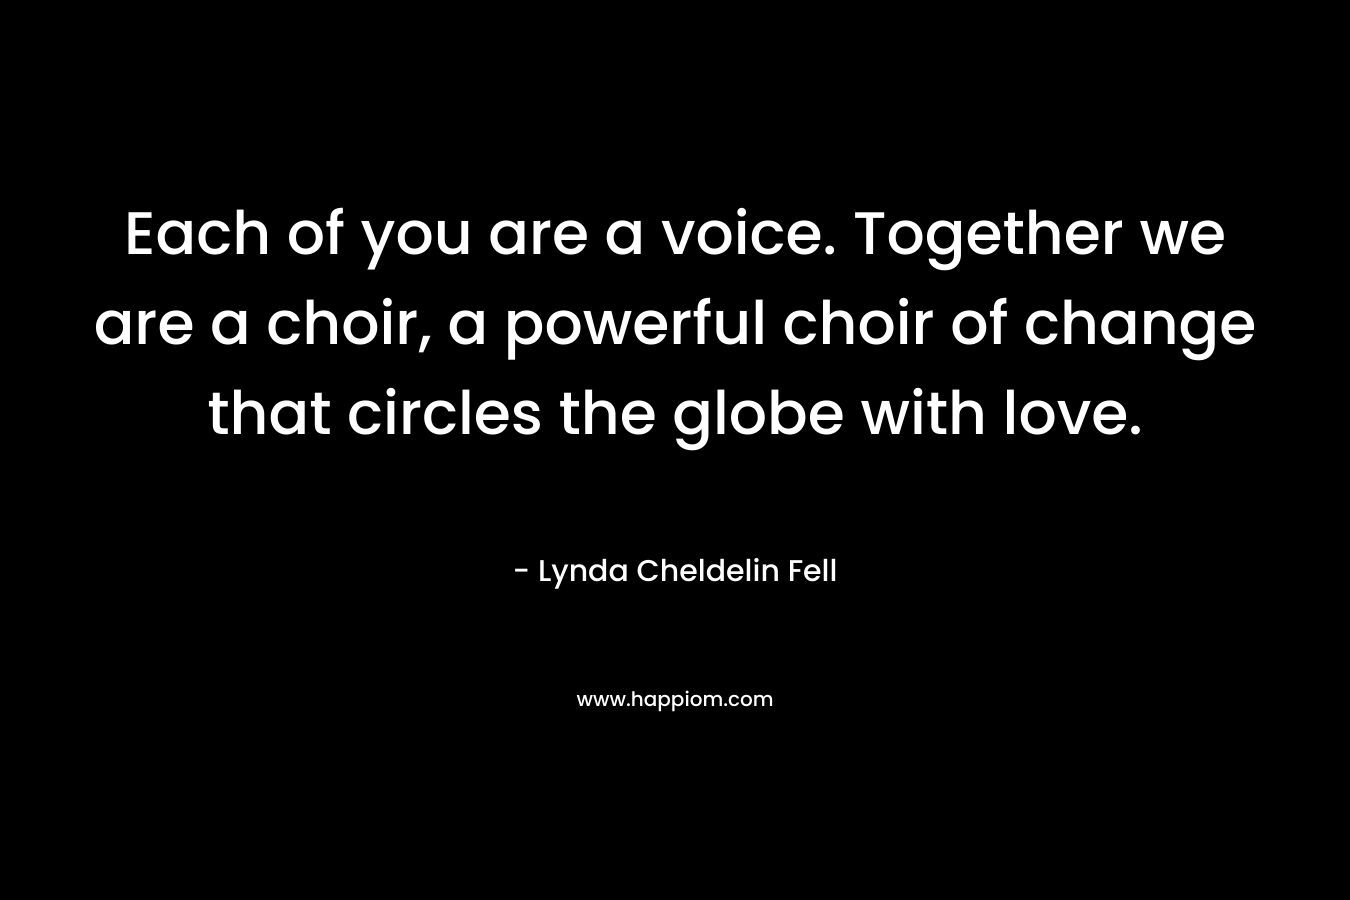 Each of you are a voice. Together we are a choir, a powerful choir of change that circles the globe with love.